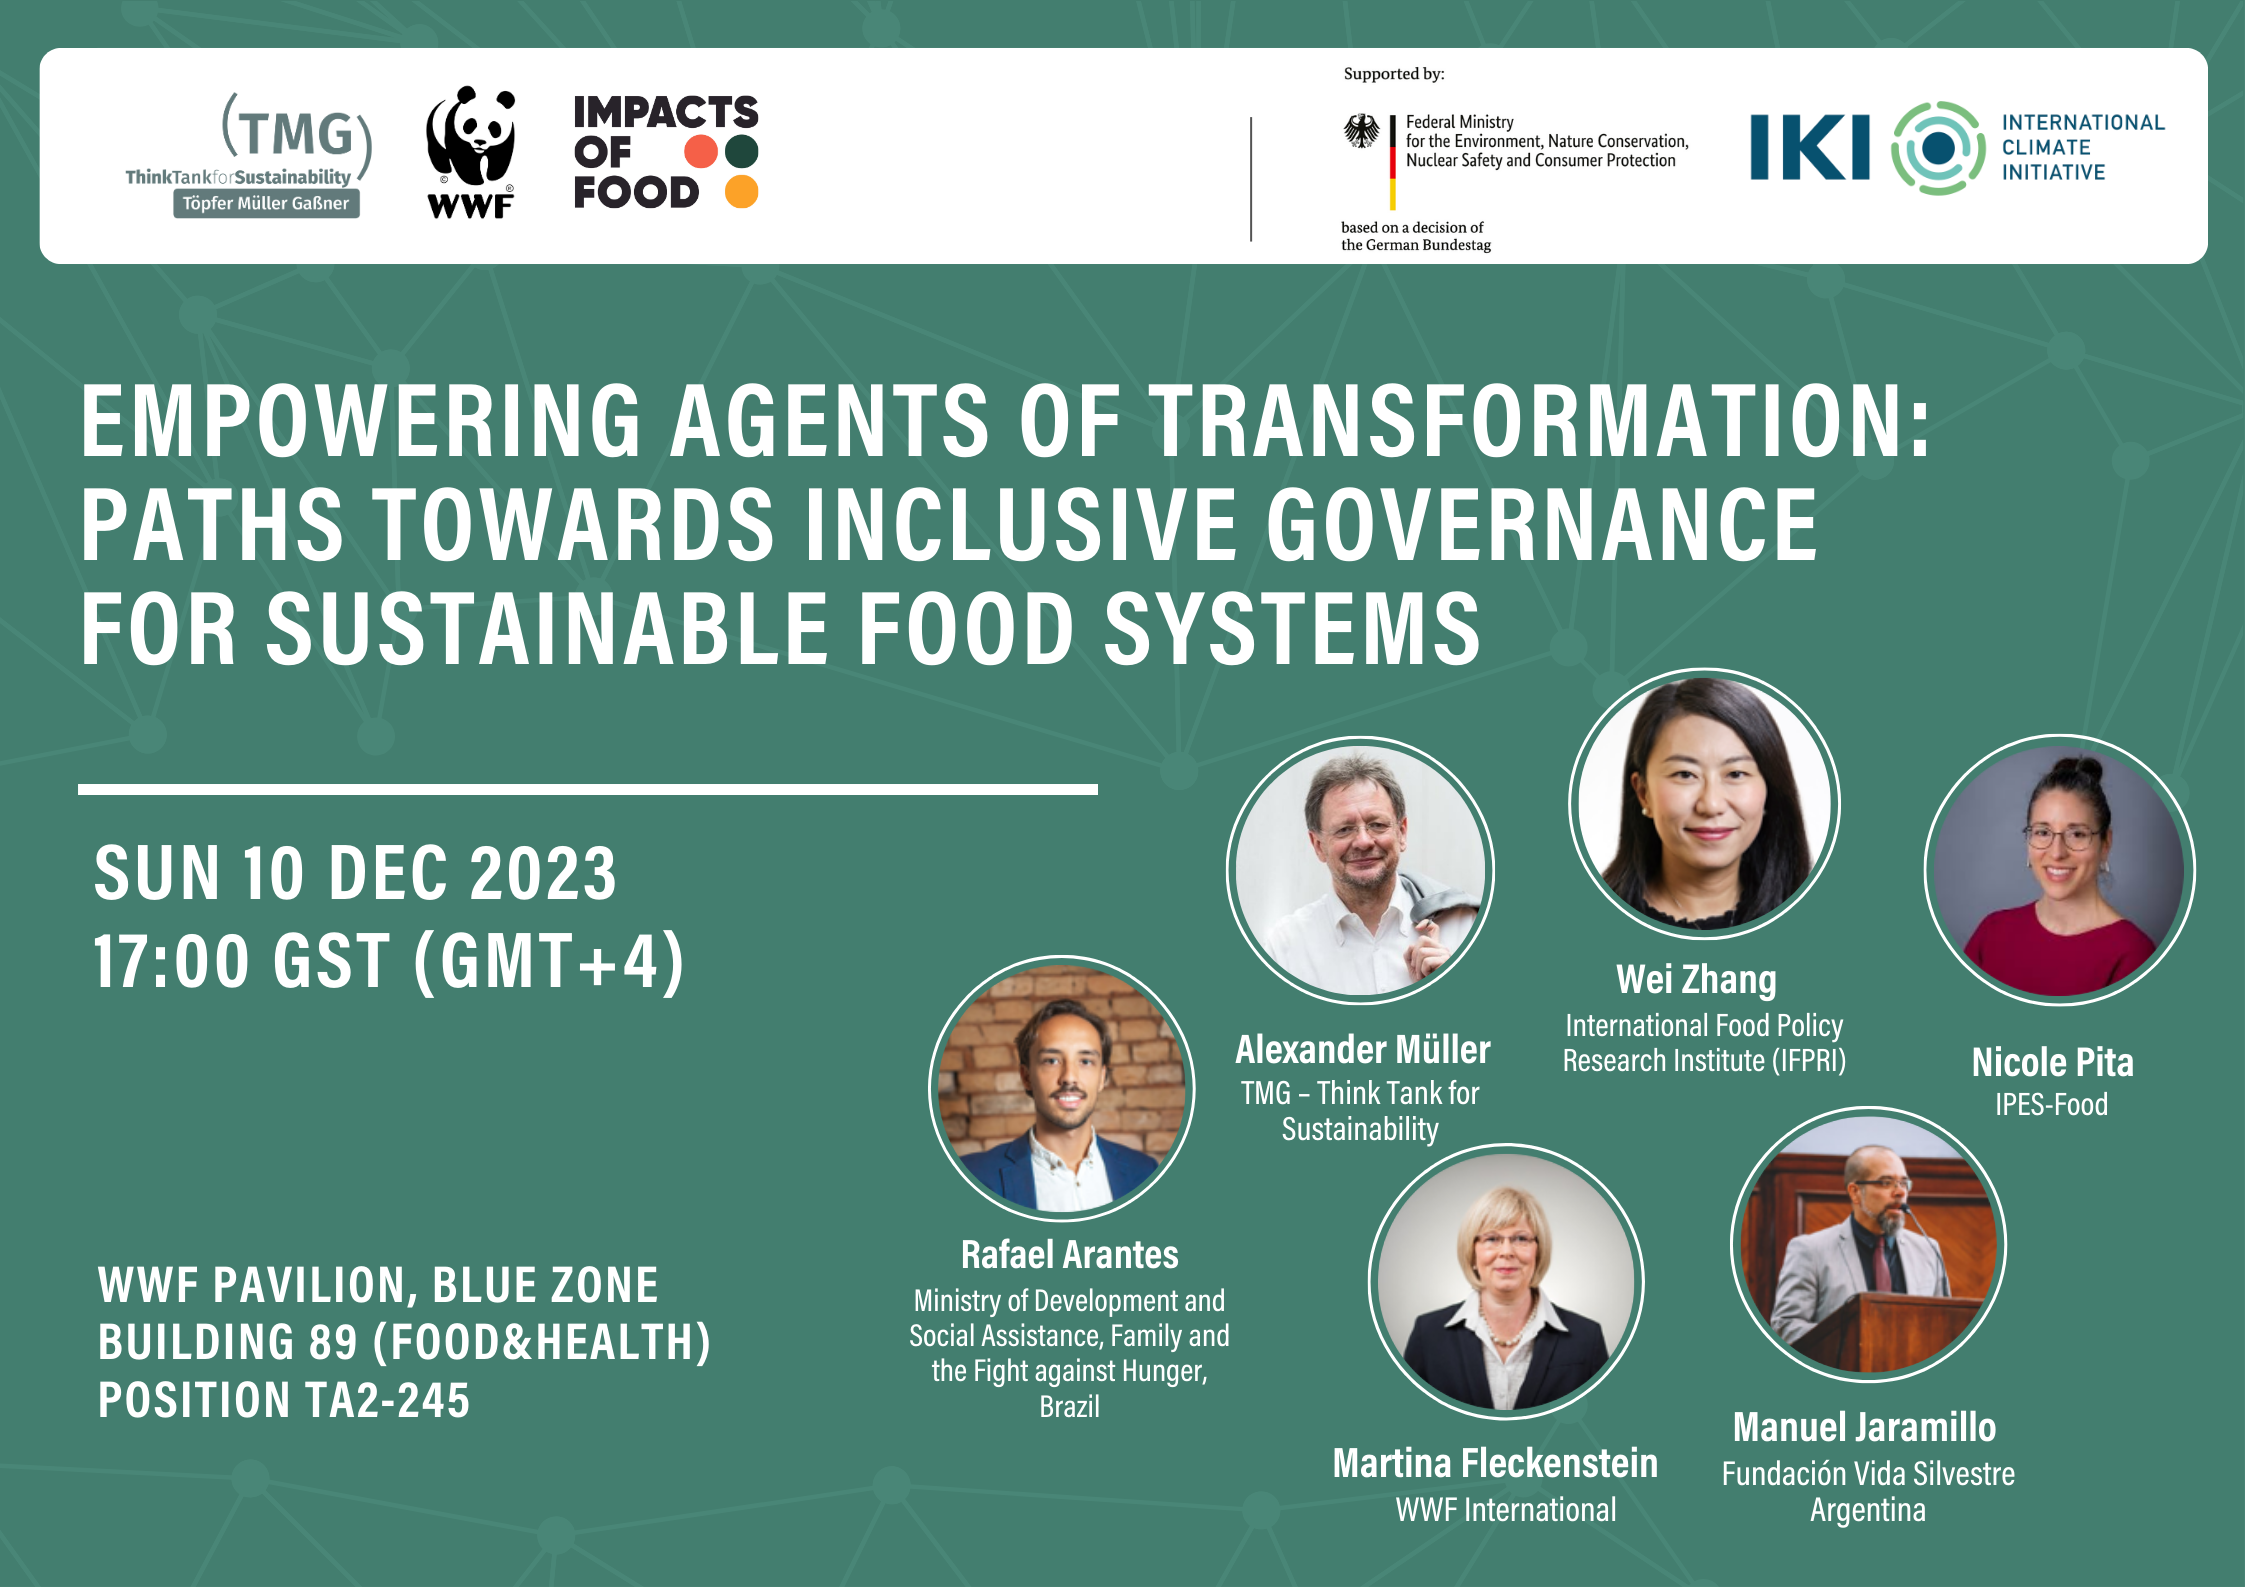 Empowering agents of transformation: Paths towards inclusive governance for sustainable food systems